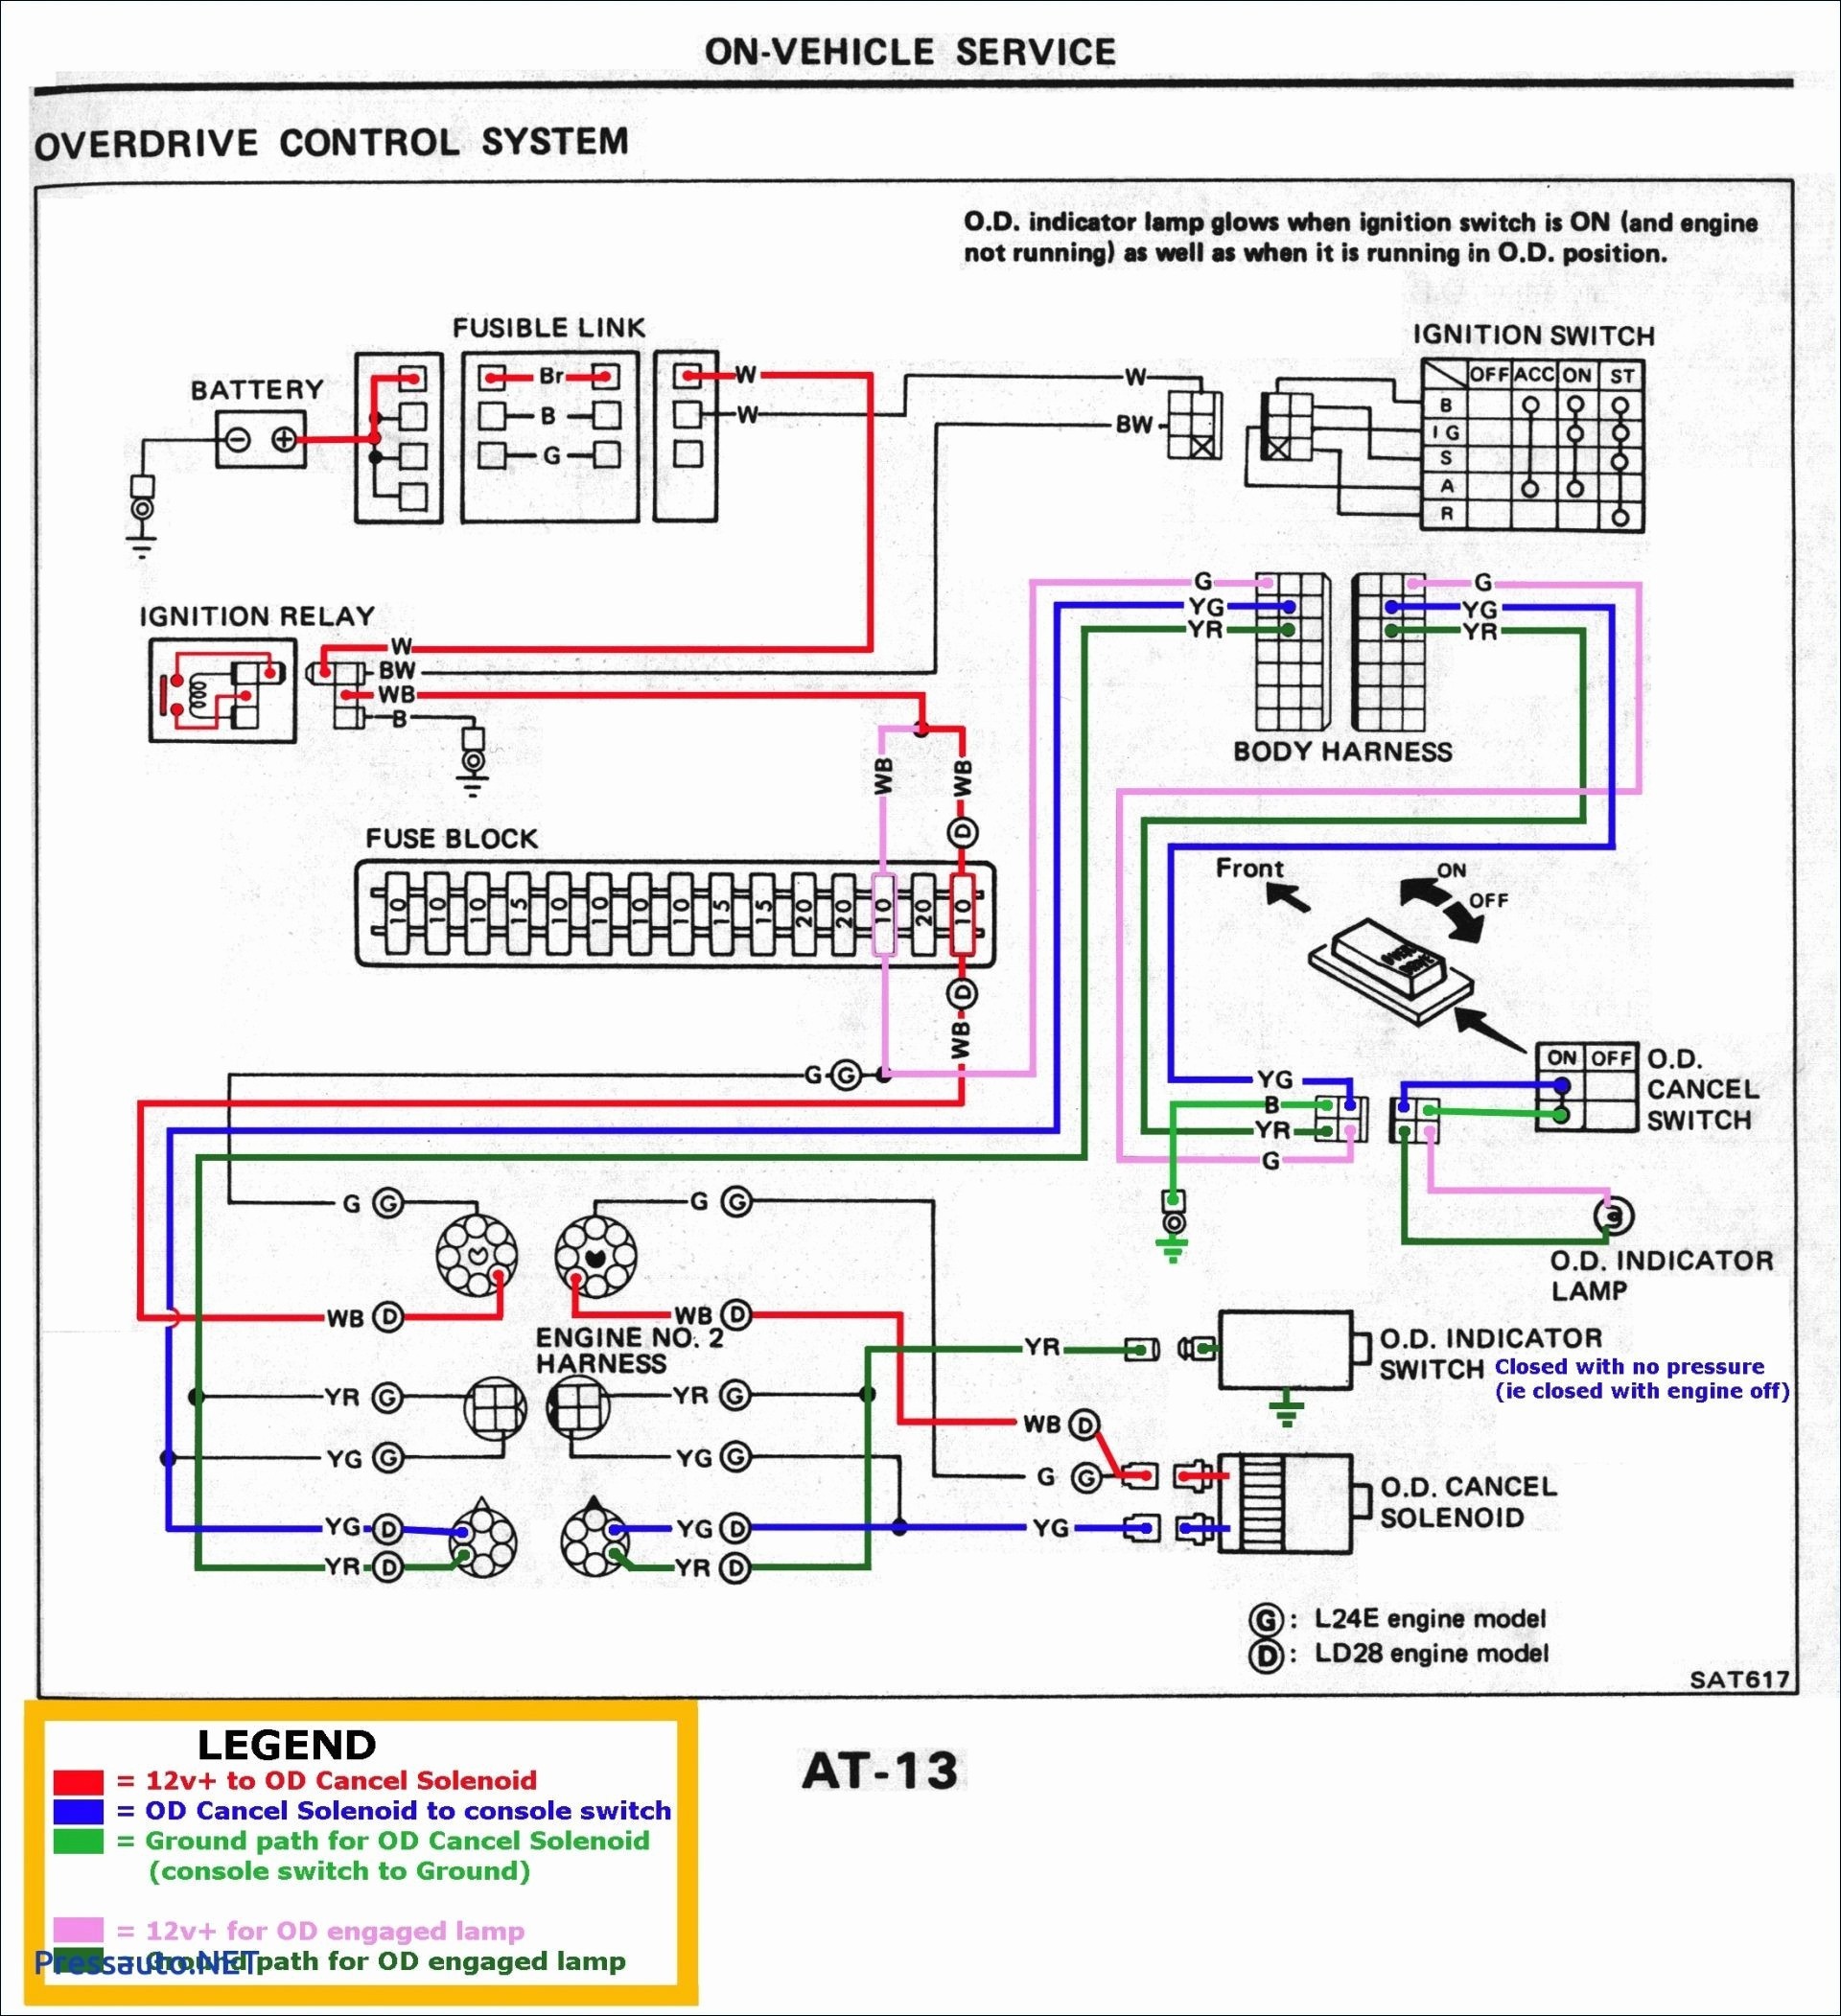 How To Wire A Double Pole Switch Diagram Book Wiring Diagram Single Pole Switch – Wiring Diagram Collection